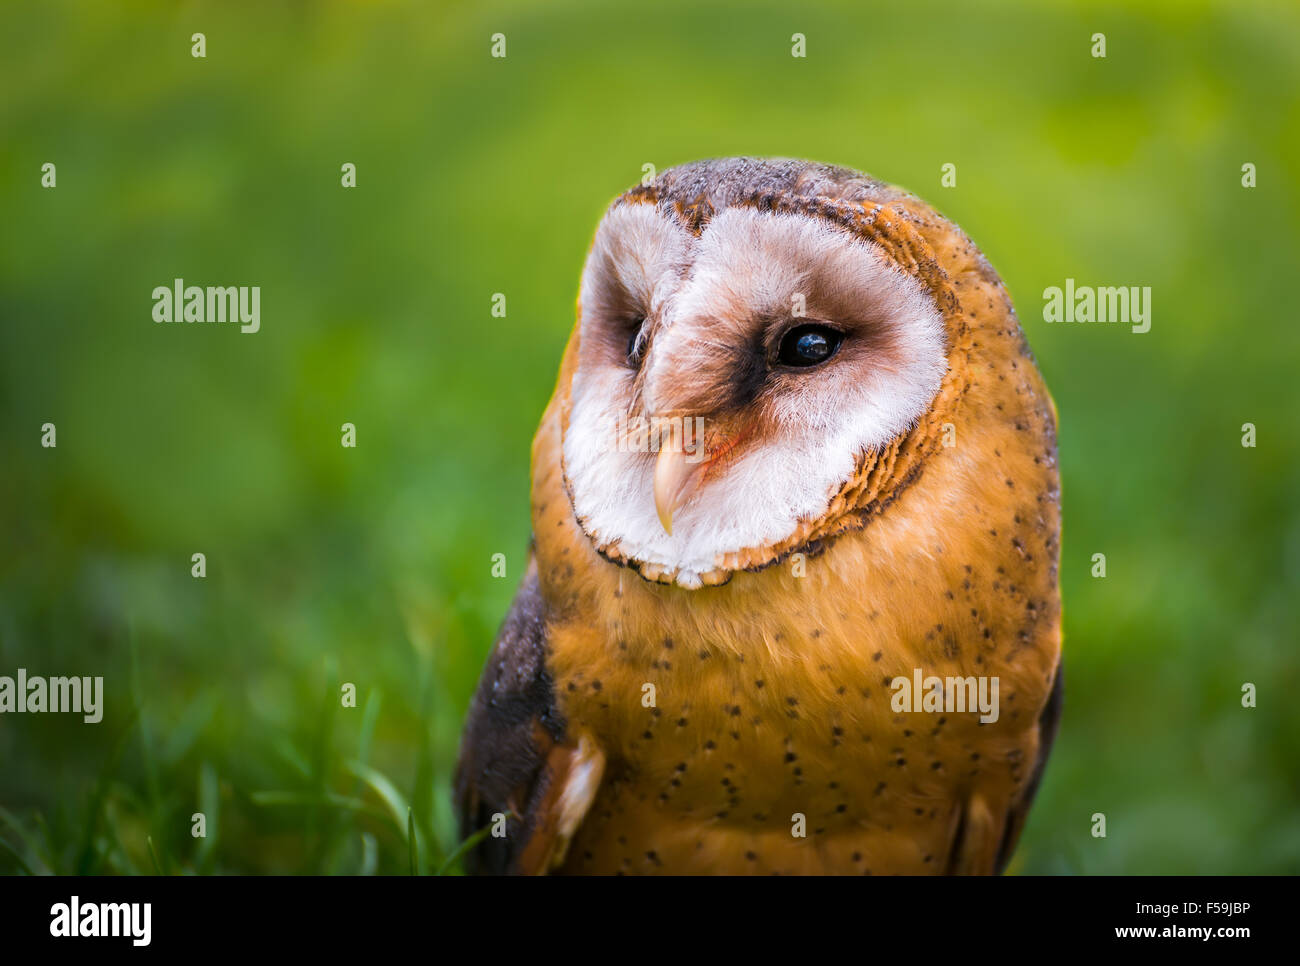 Tyto alba - Close Up Portrait of a Barn Owl on Blurred Green Grass Background Stock Photo